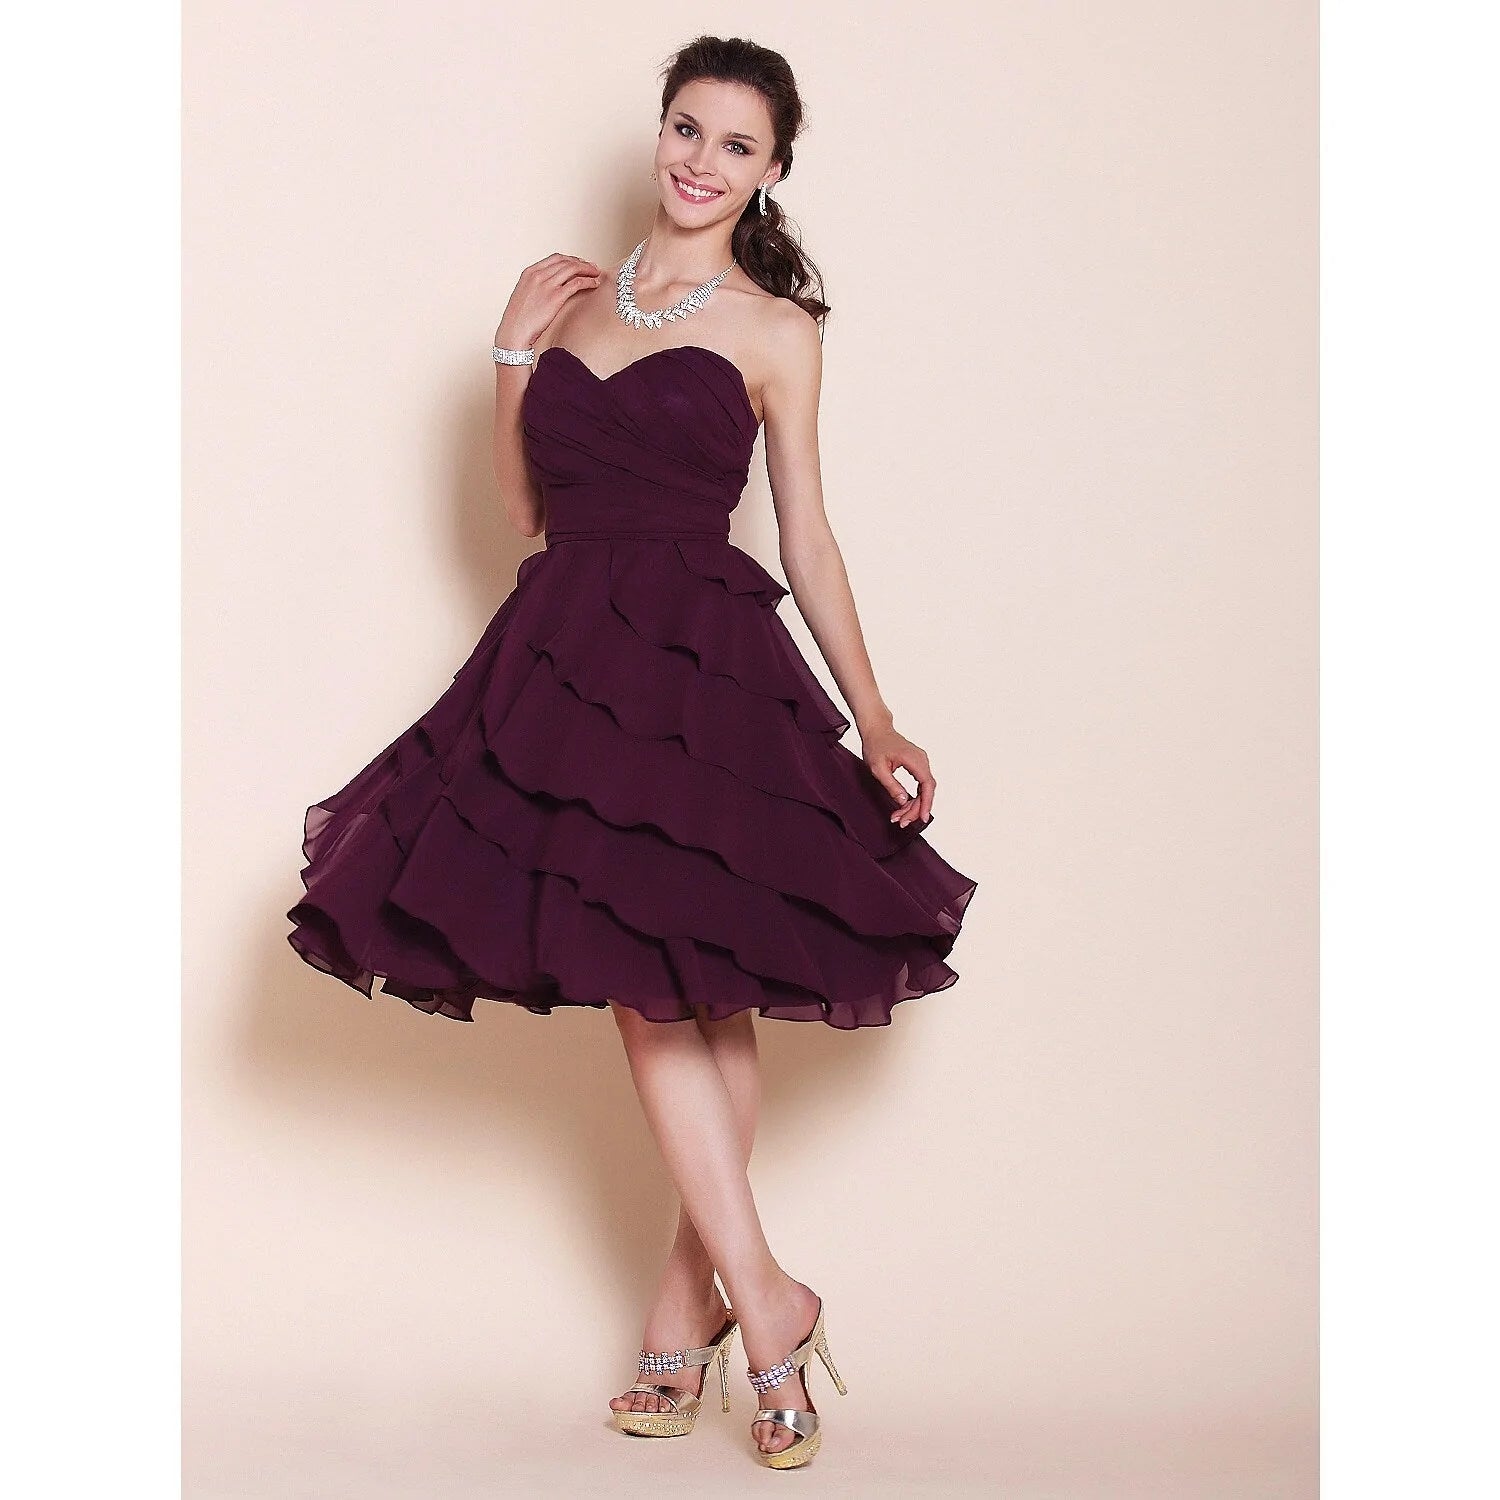 Princess / A-Line Bridesmaid Dress Sweetheart Neckline / Strapless Sleeveless Open Back Knee Length Chiffon with Side Draping